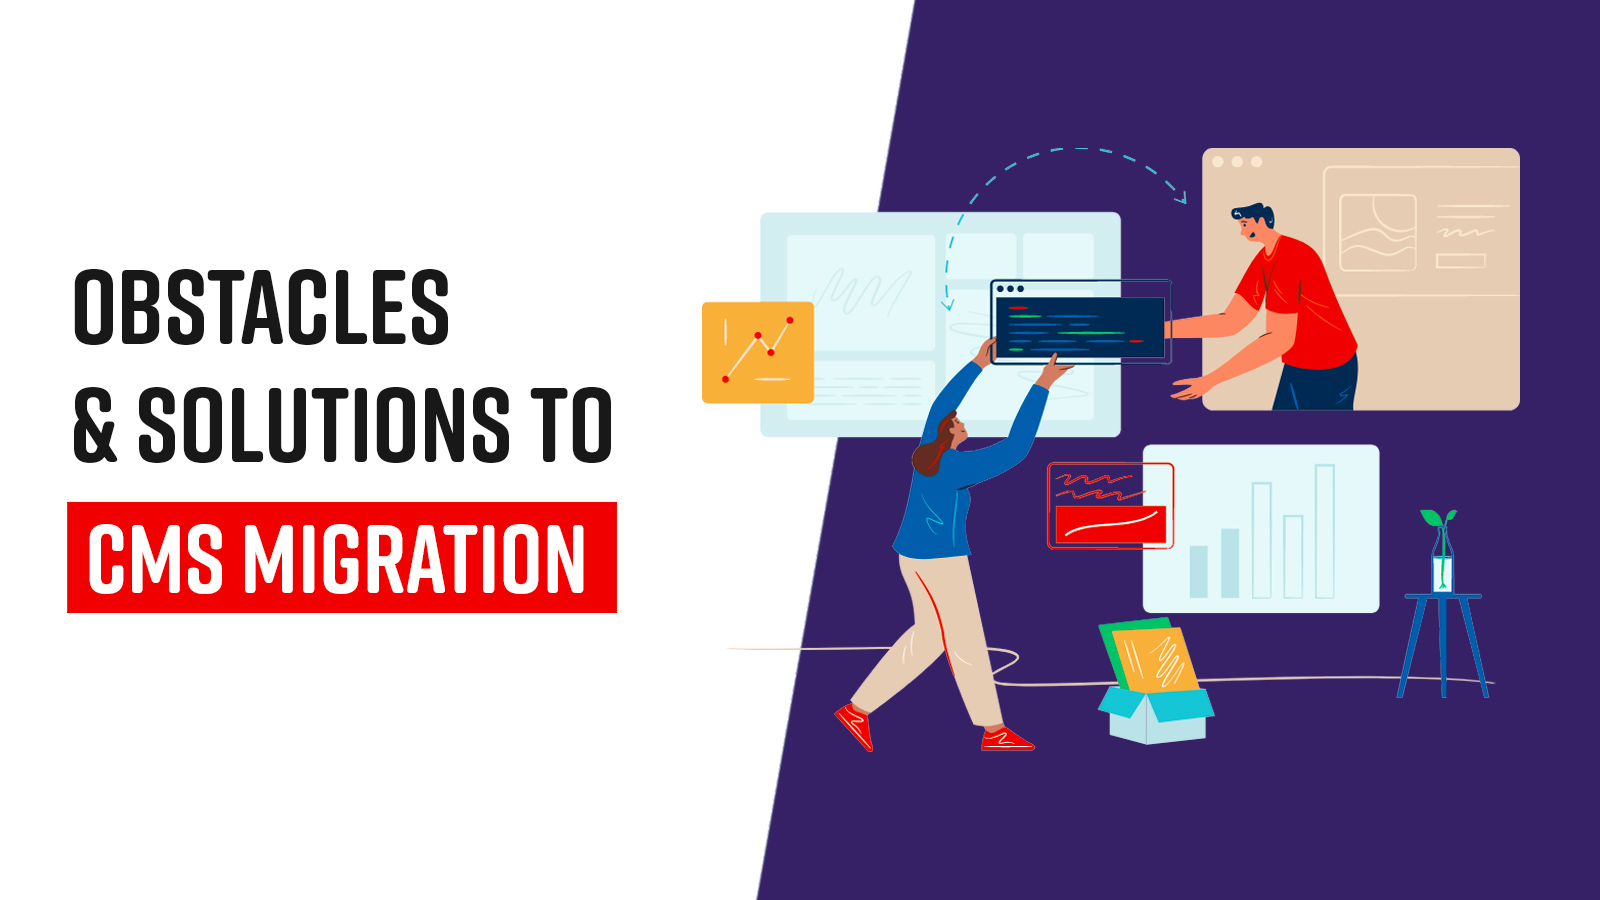 5 obstacles to CMS migrations and the solutions to overcome them the best